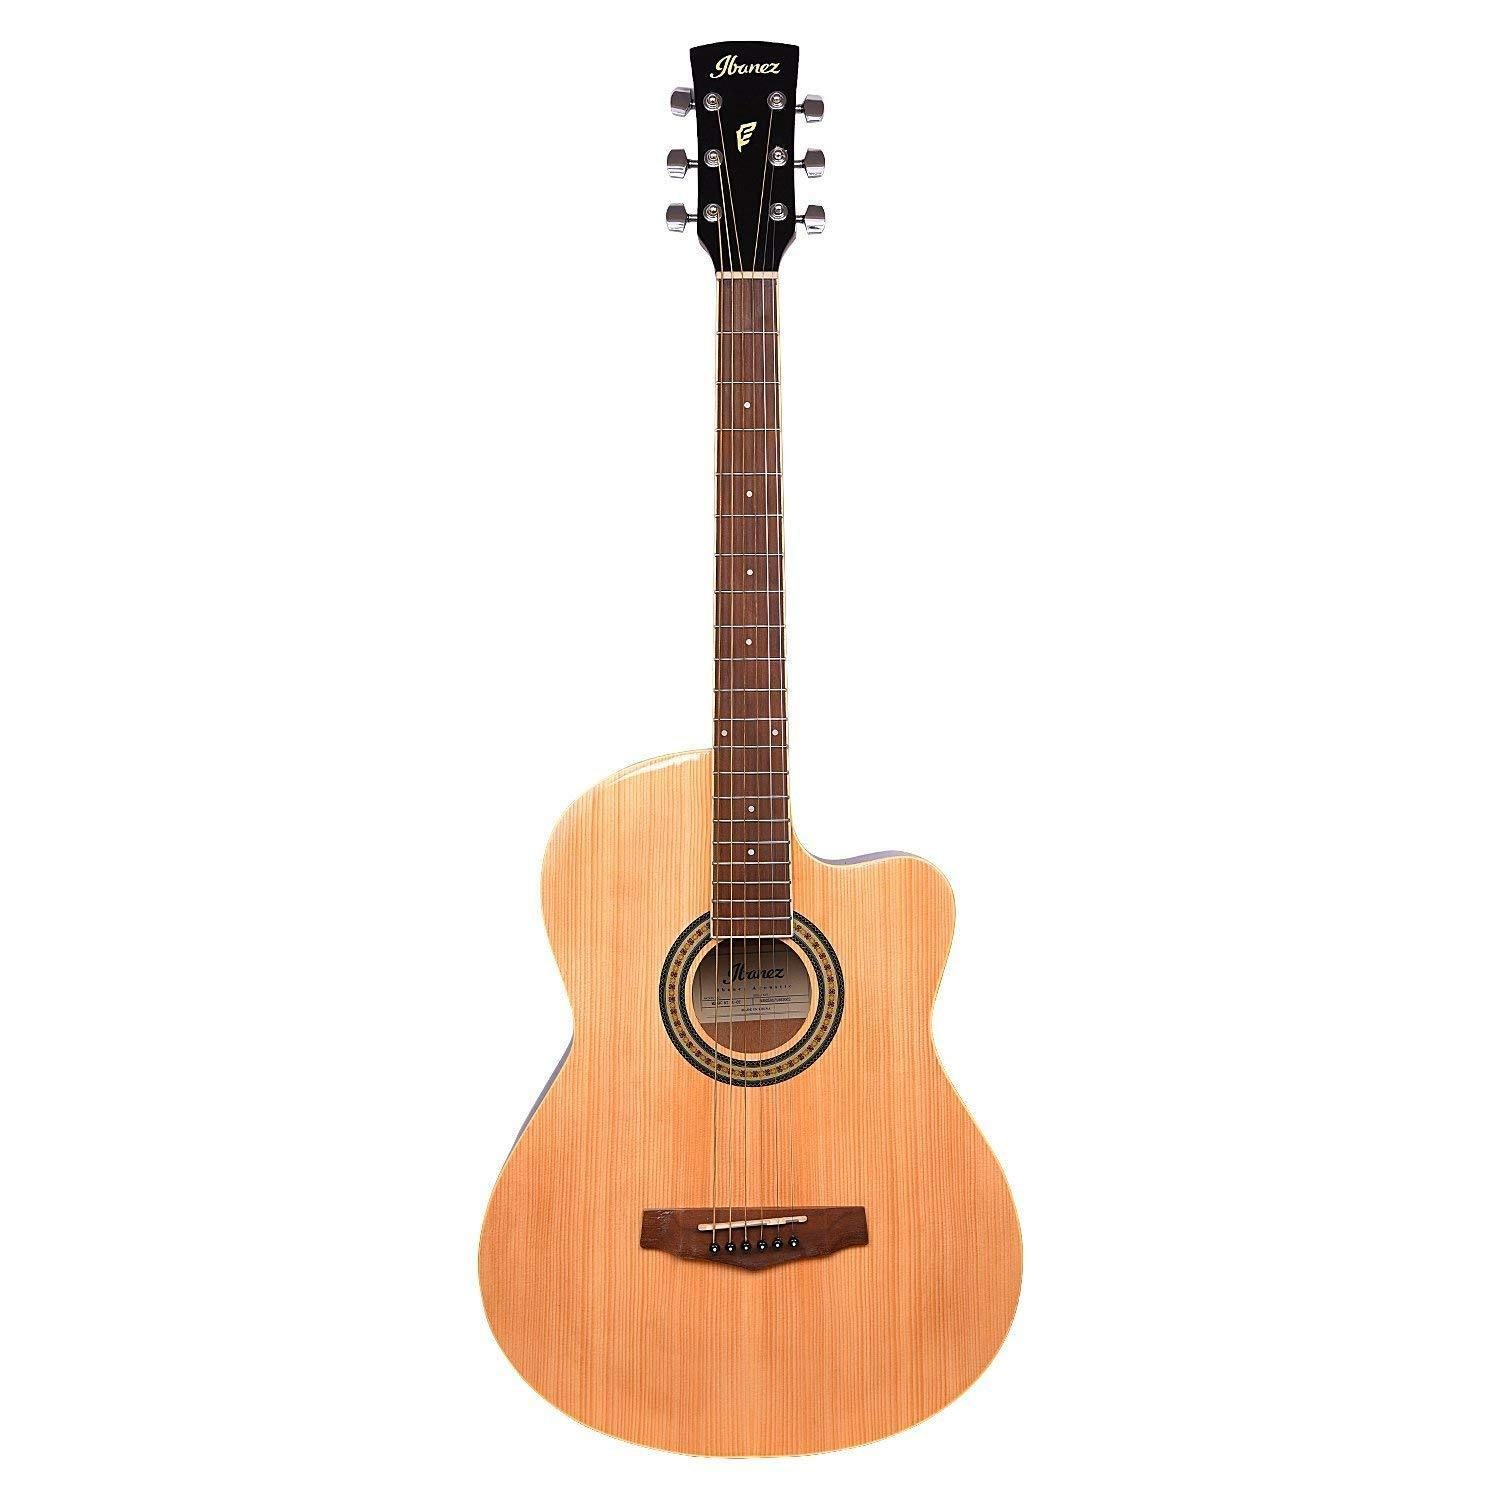 Image of Ibanez MD39C 39 inch Cutaway Acoustic Guitar